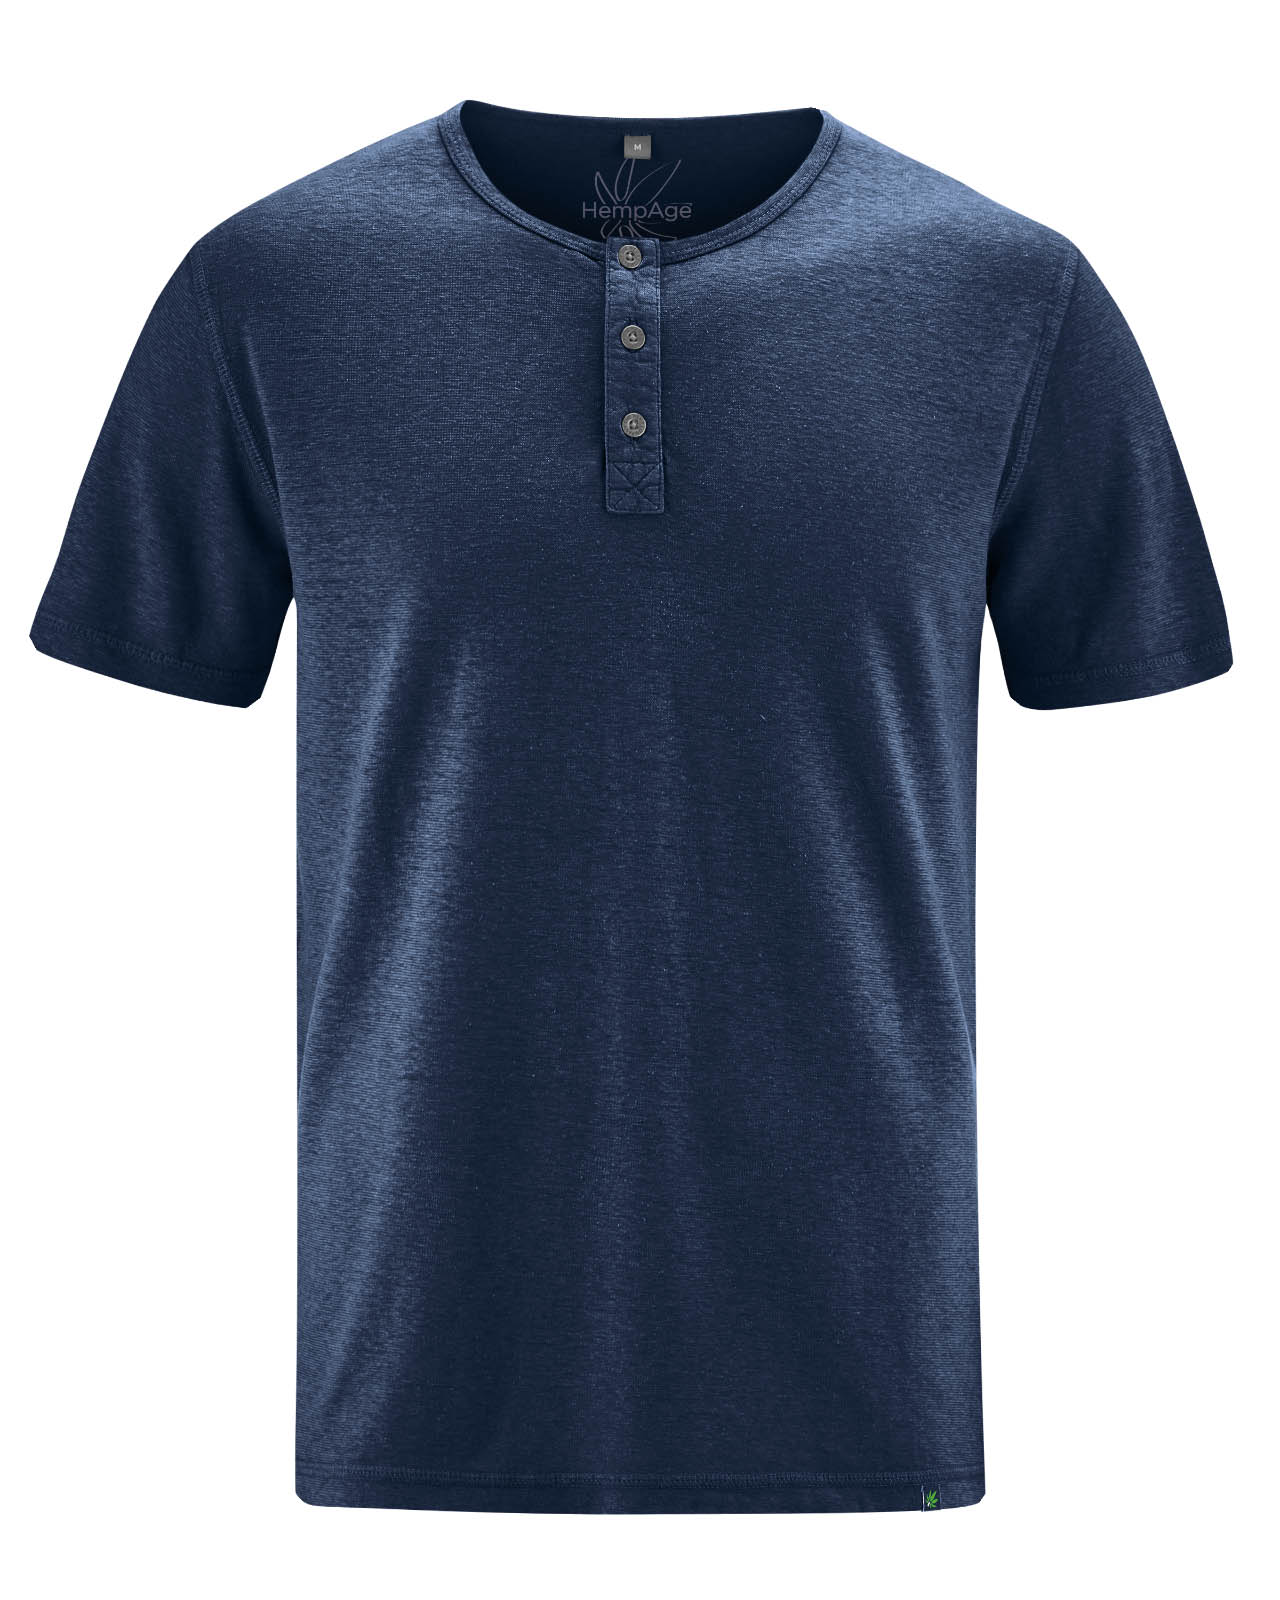 henley homme DH810_a_navy